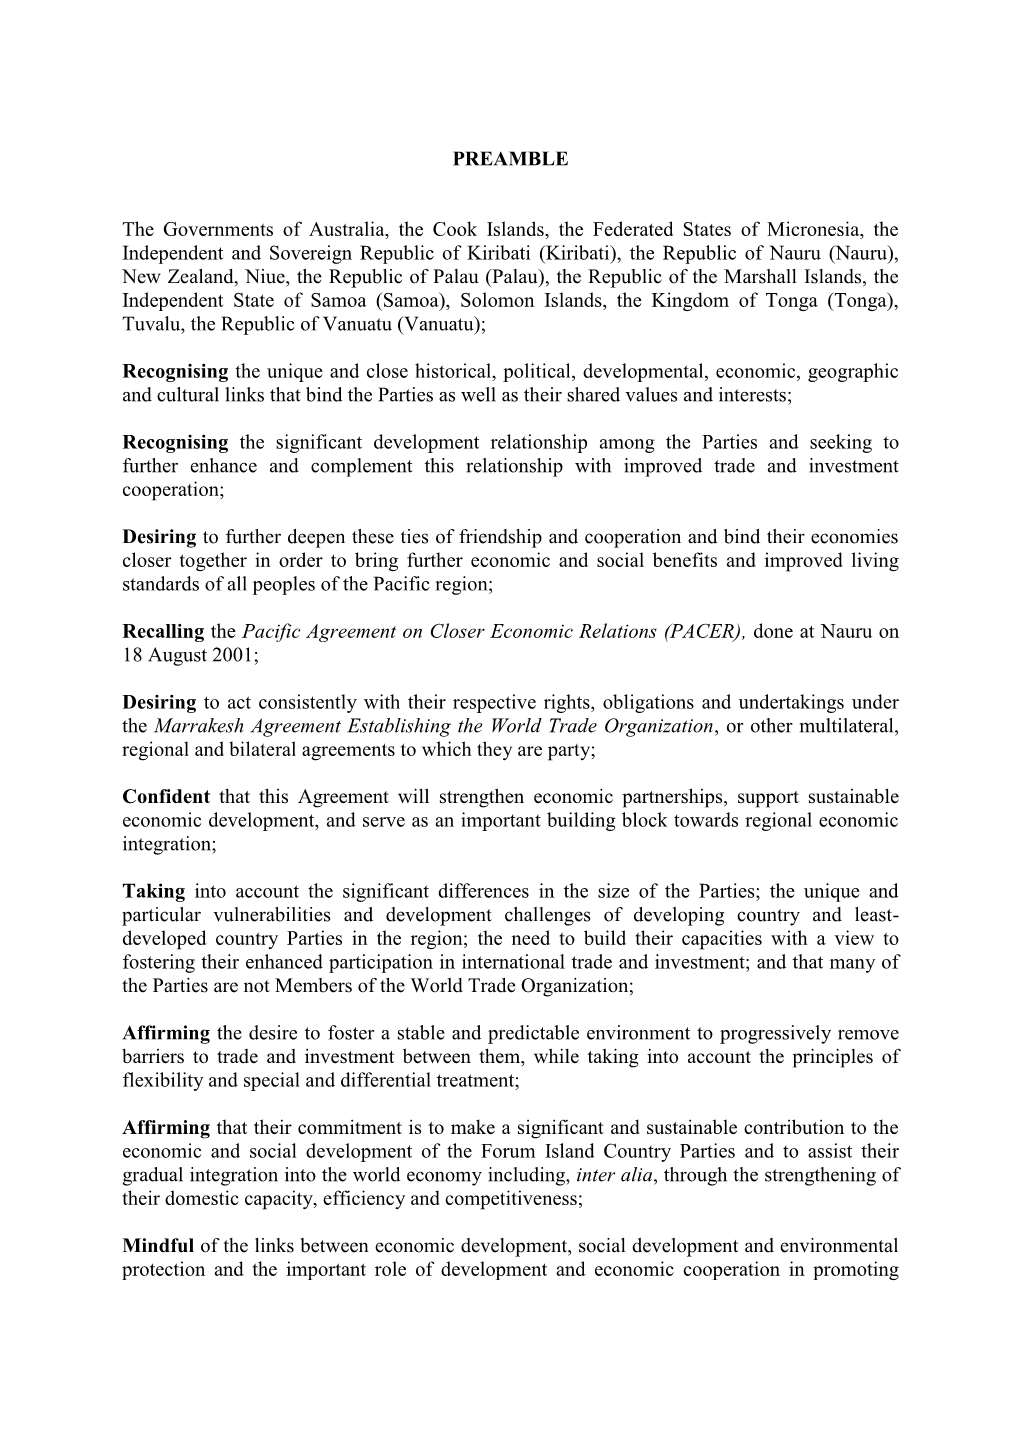 PREAMBLE the Governments of Australia, the Cook Islands, The